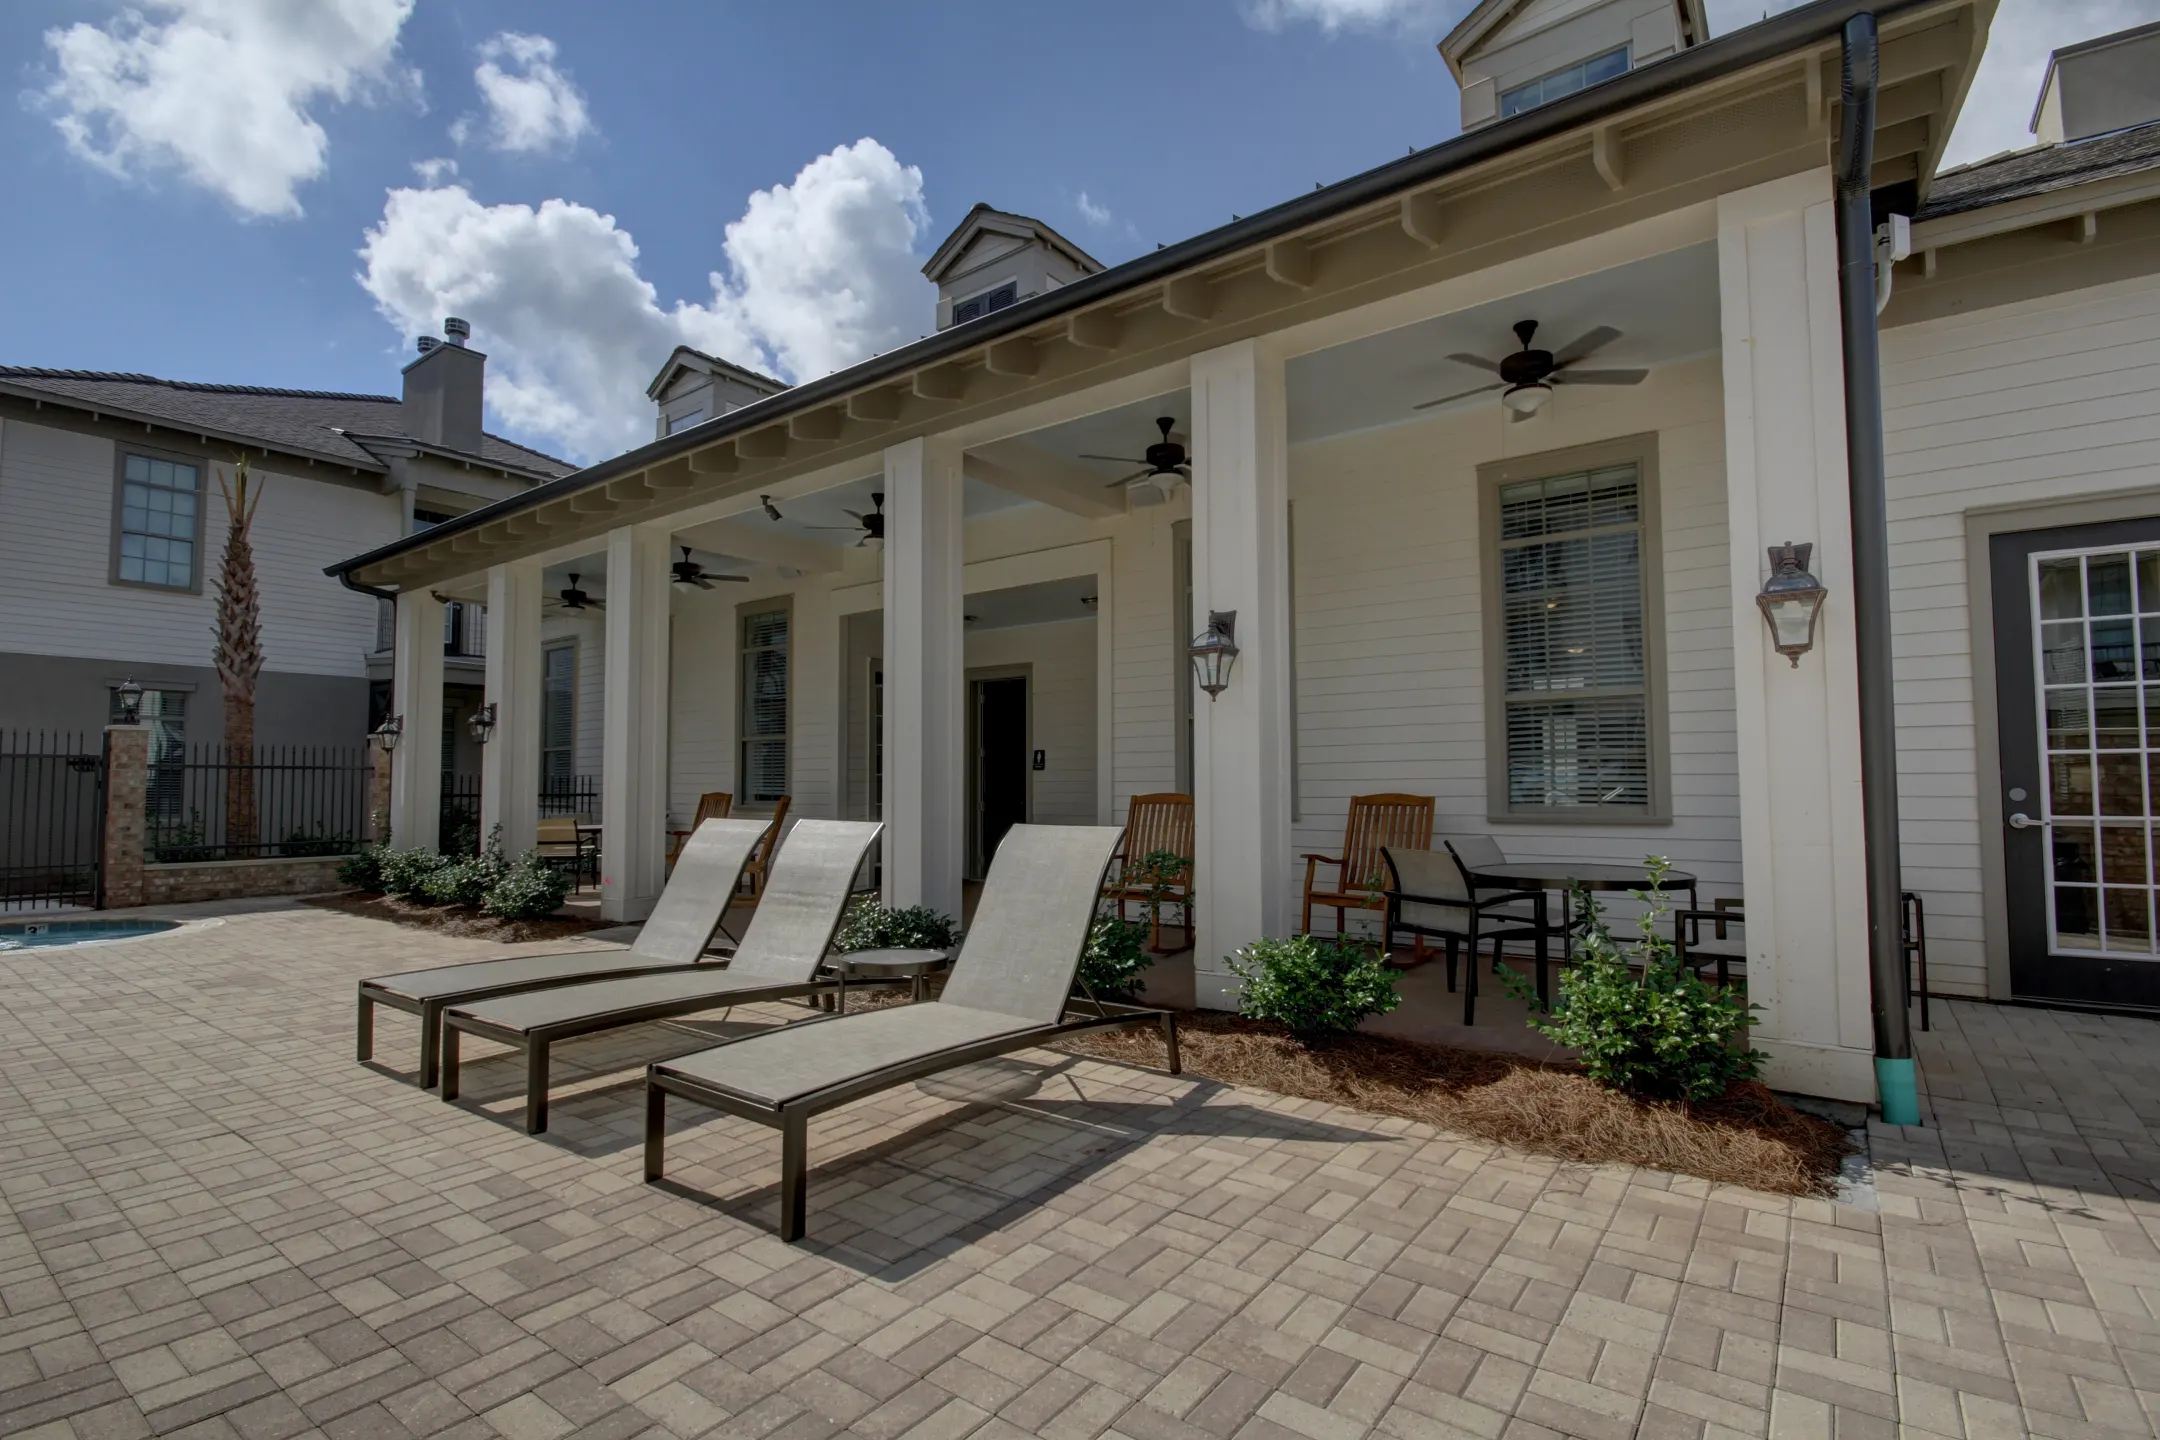 Building - Waterview Luxury Apartments - Youngsville, LA